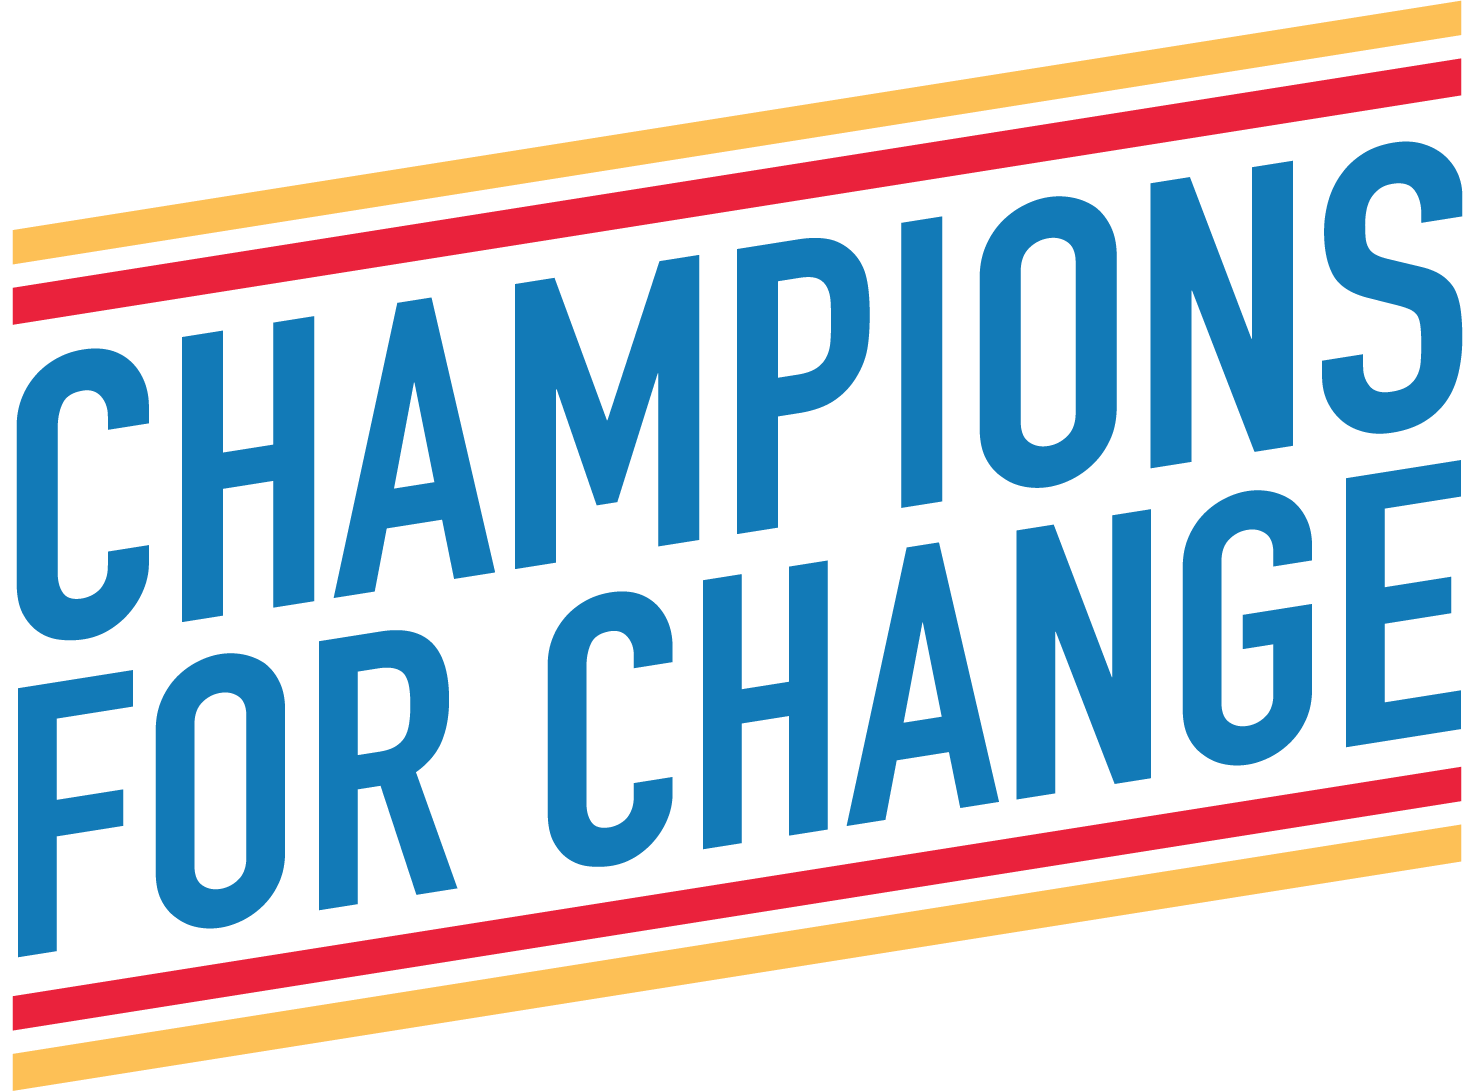 Champions for Change